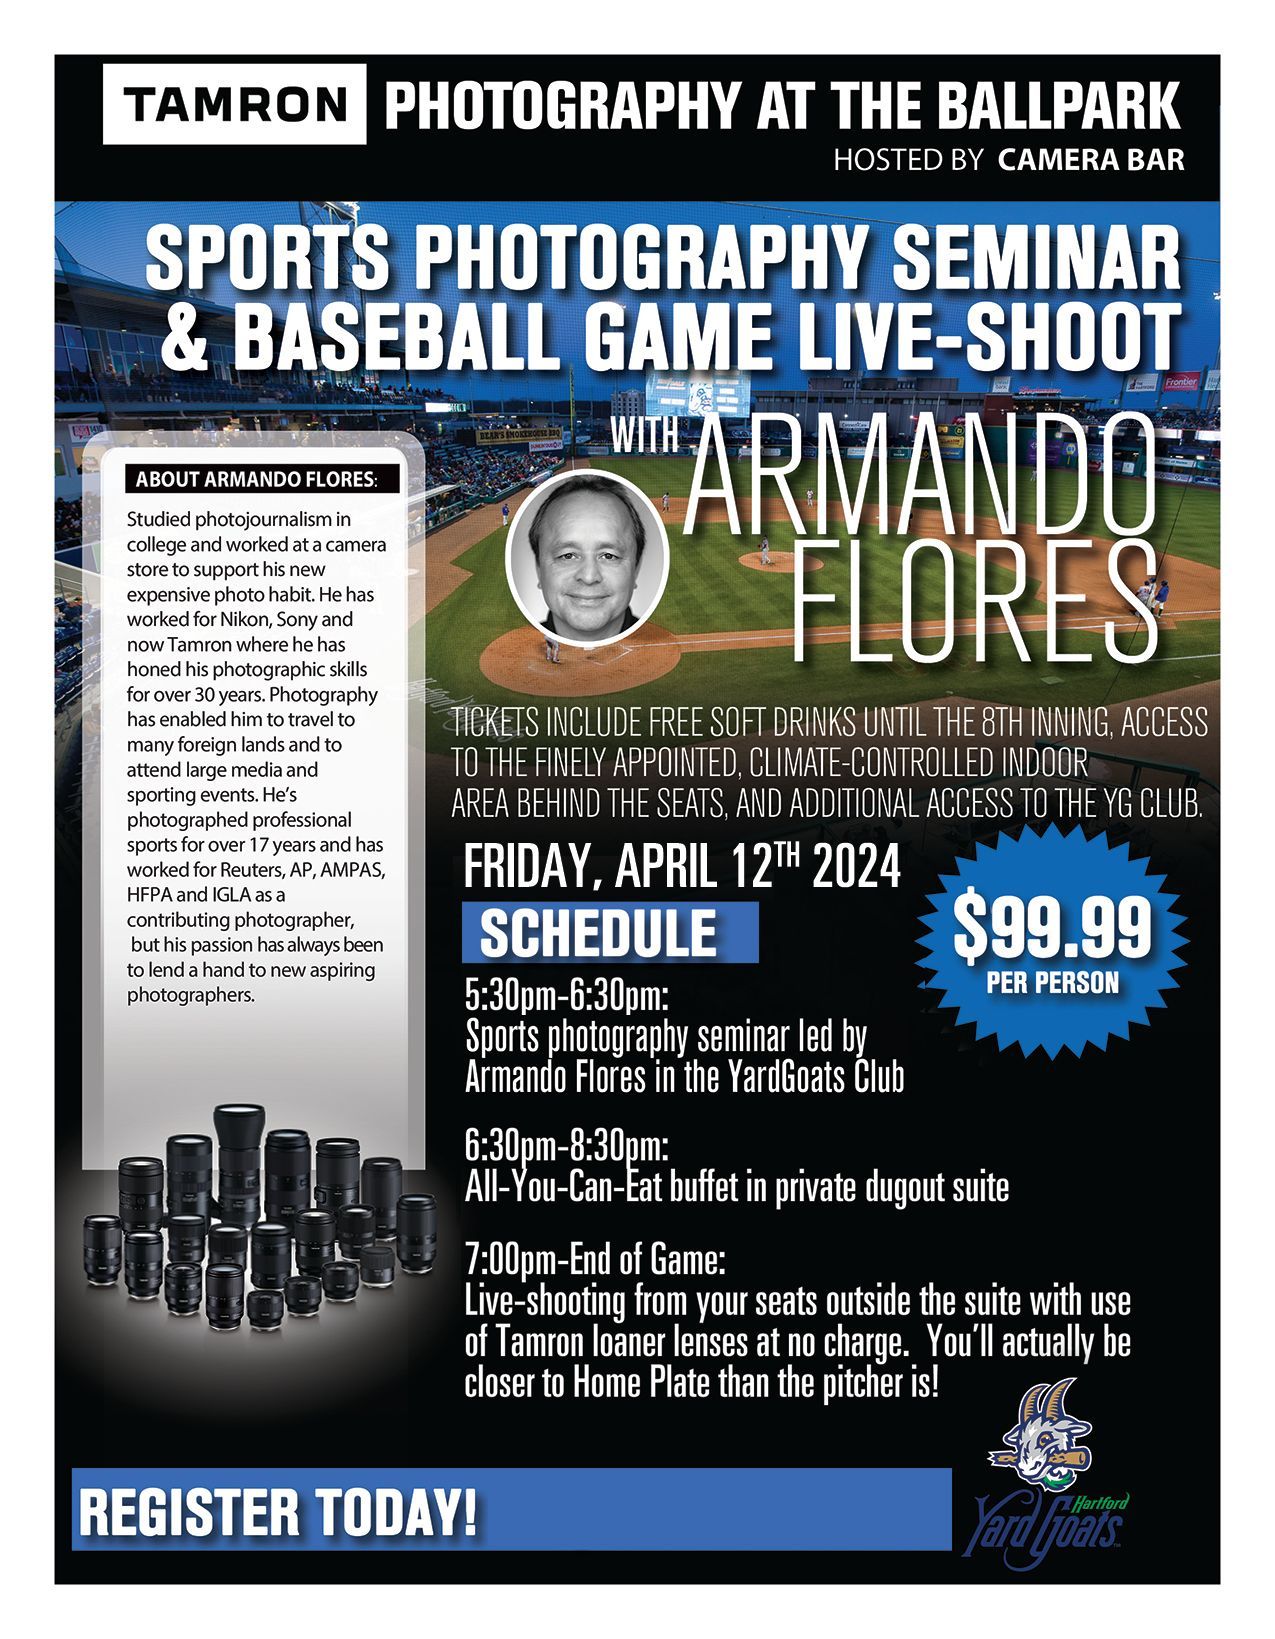 Register for Tamron sports photography seminar